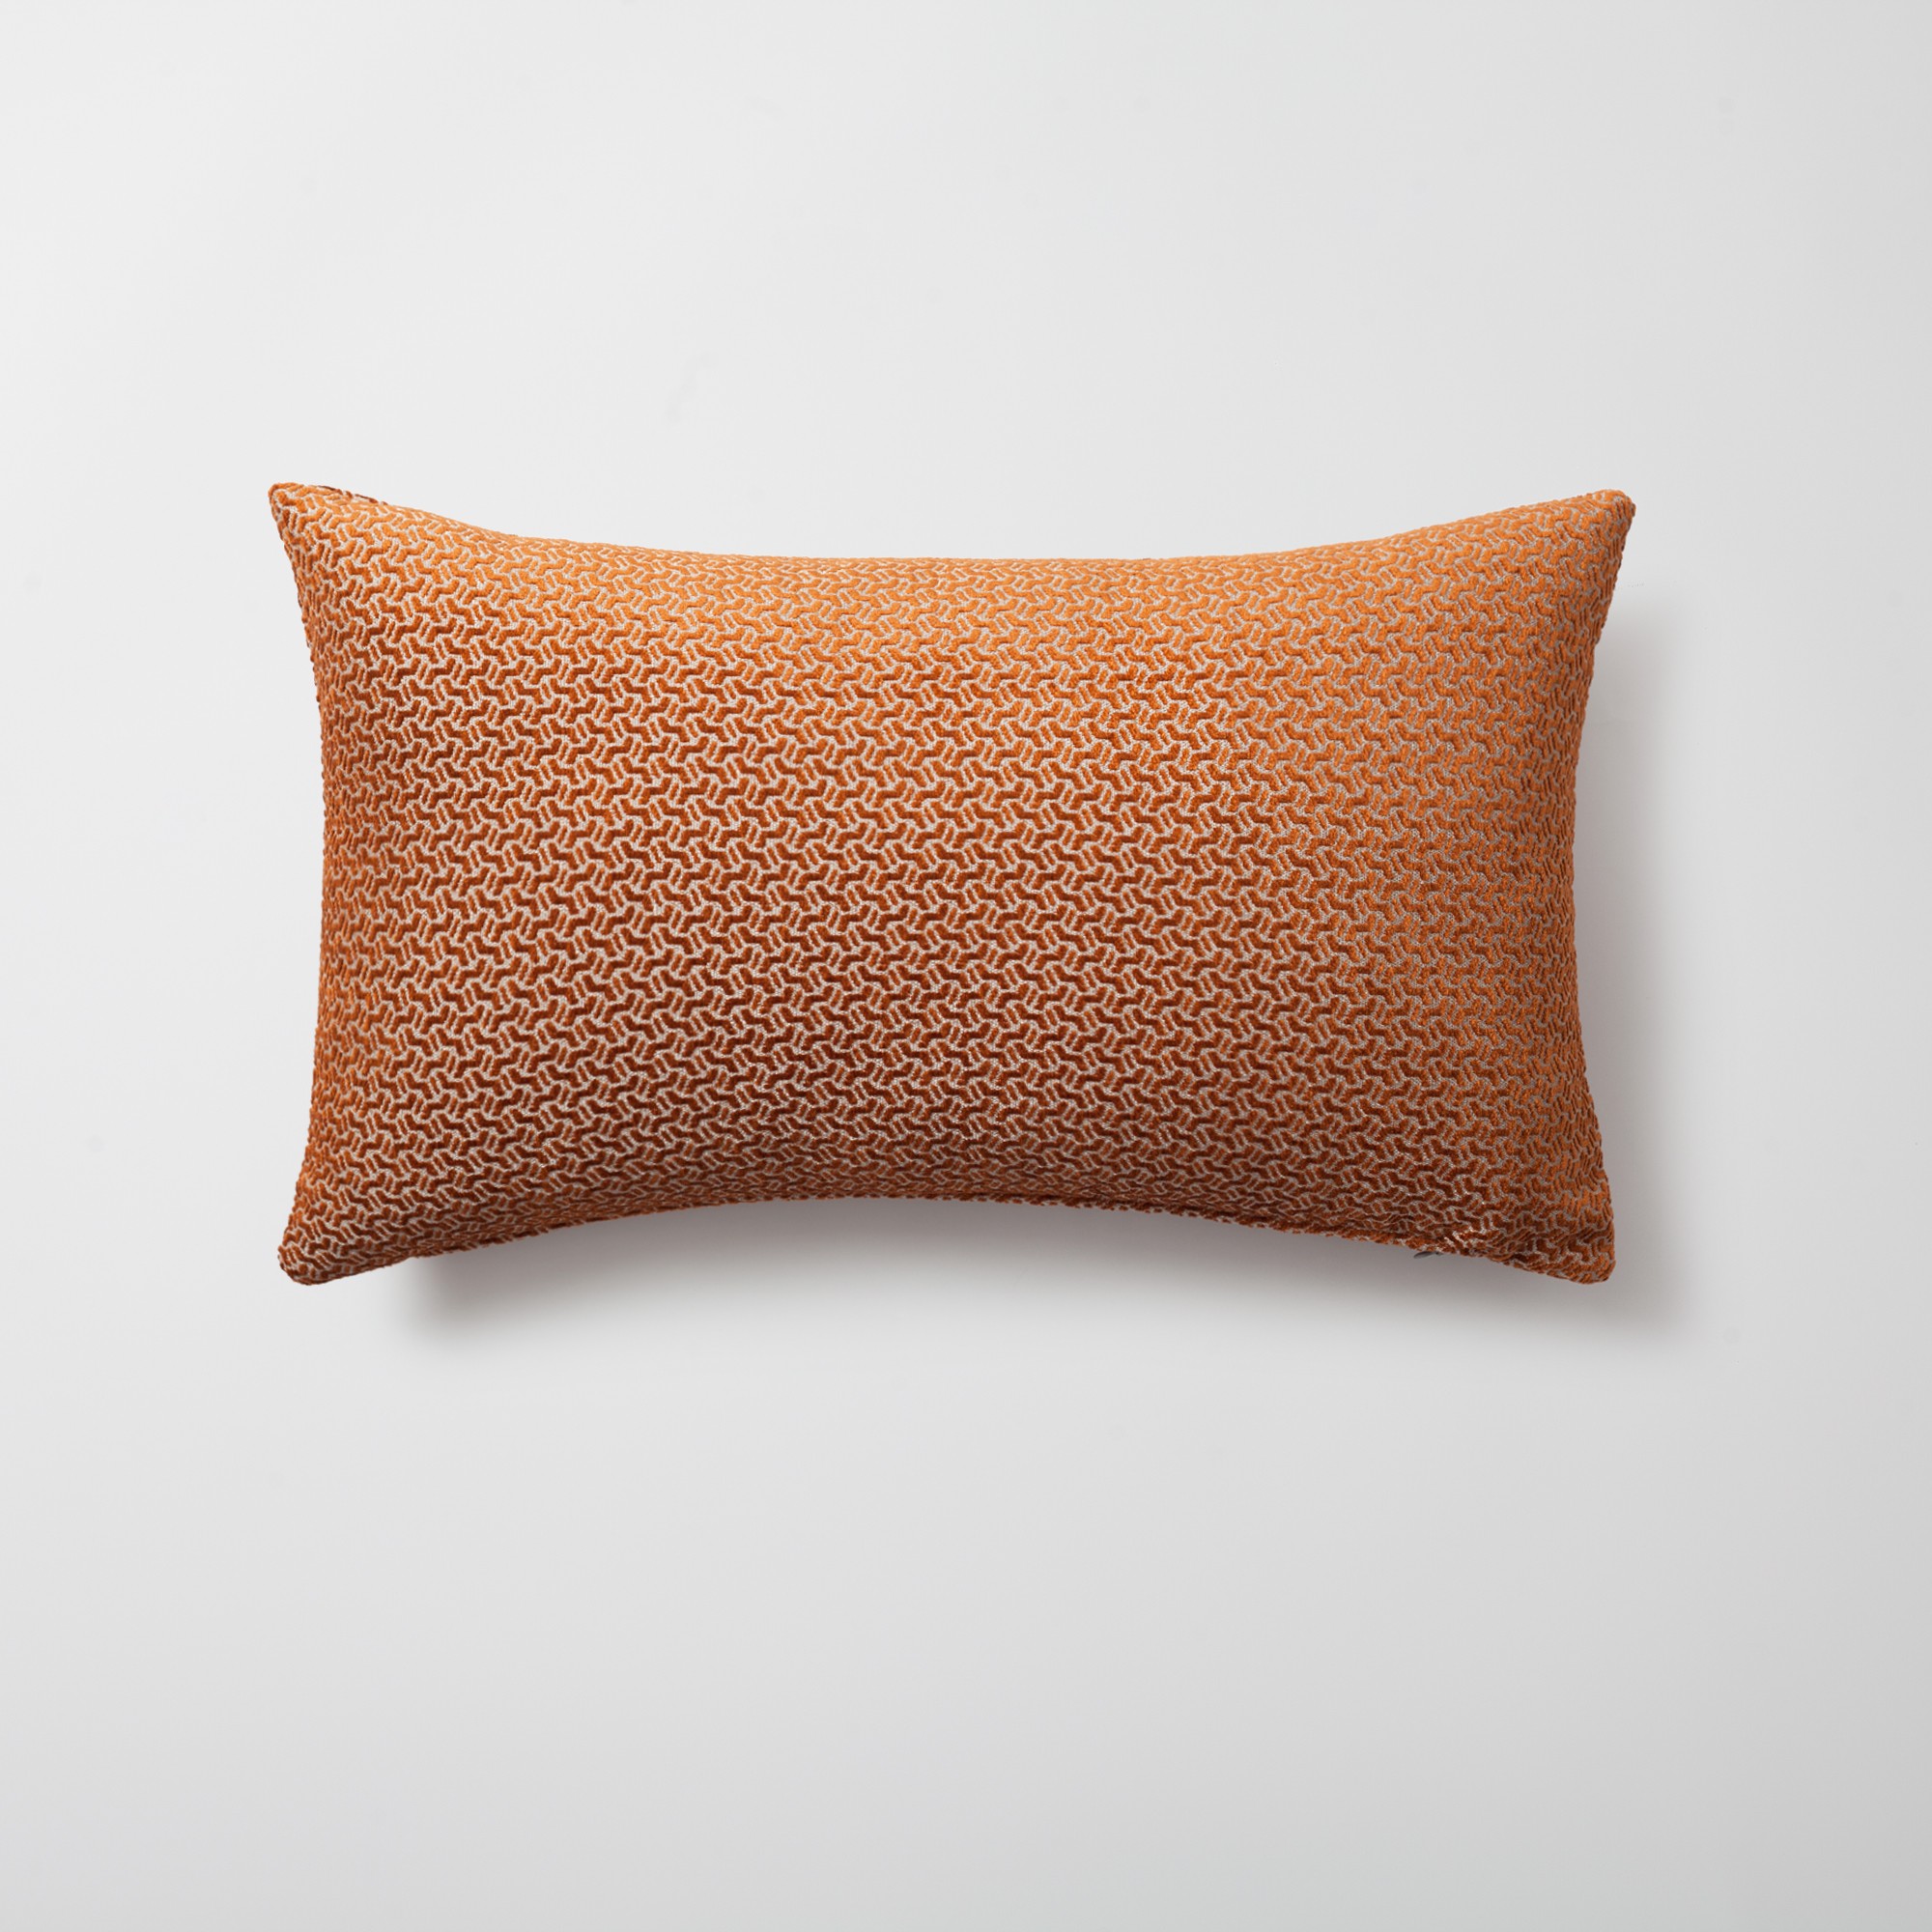 "Arte" - Geometric Patterned 12x20 Inch Cushion - Orange (Cover Only)